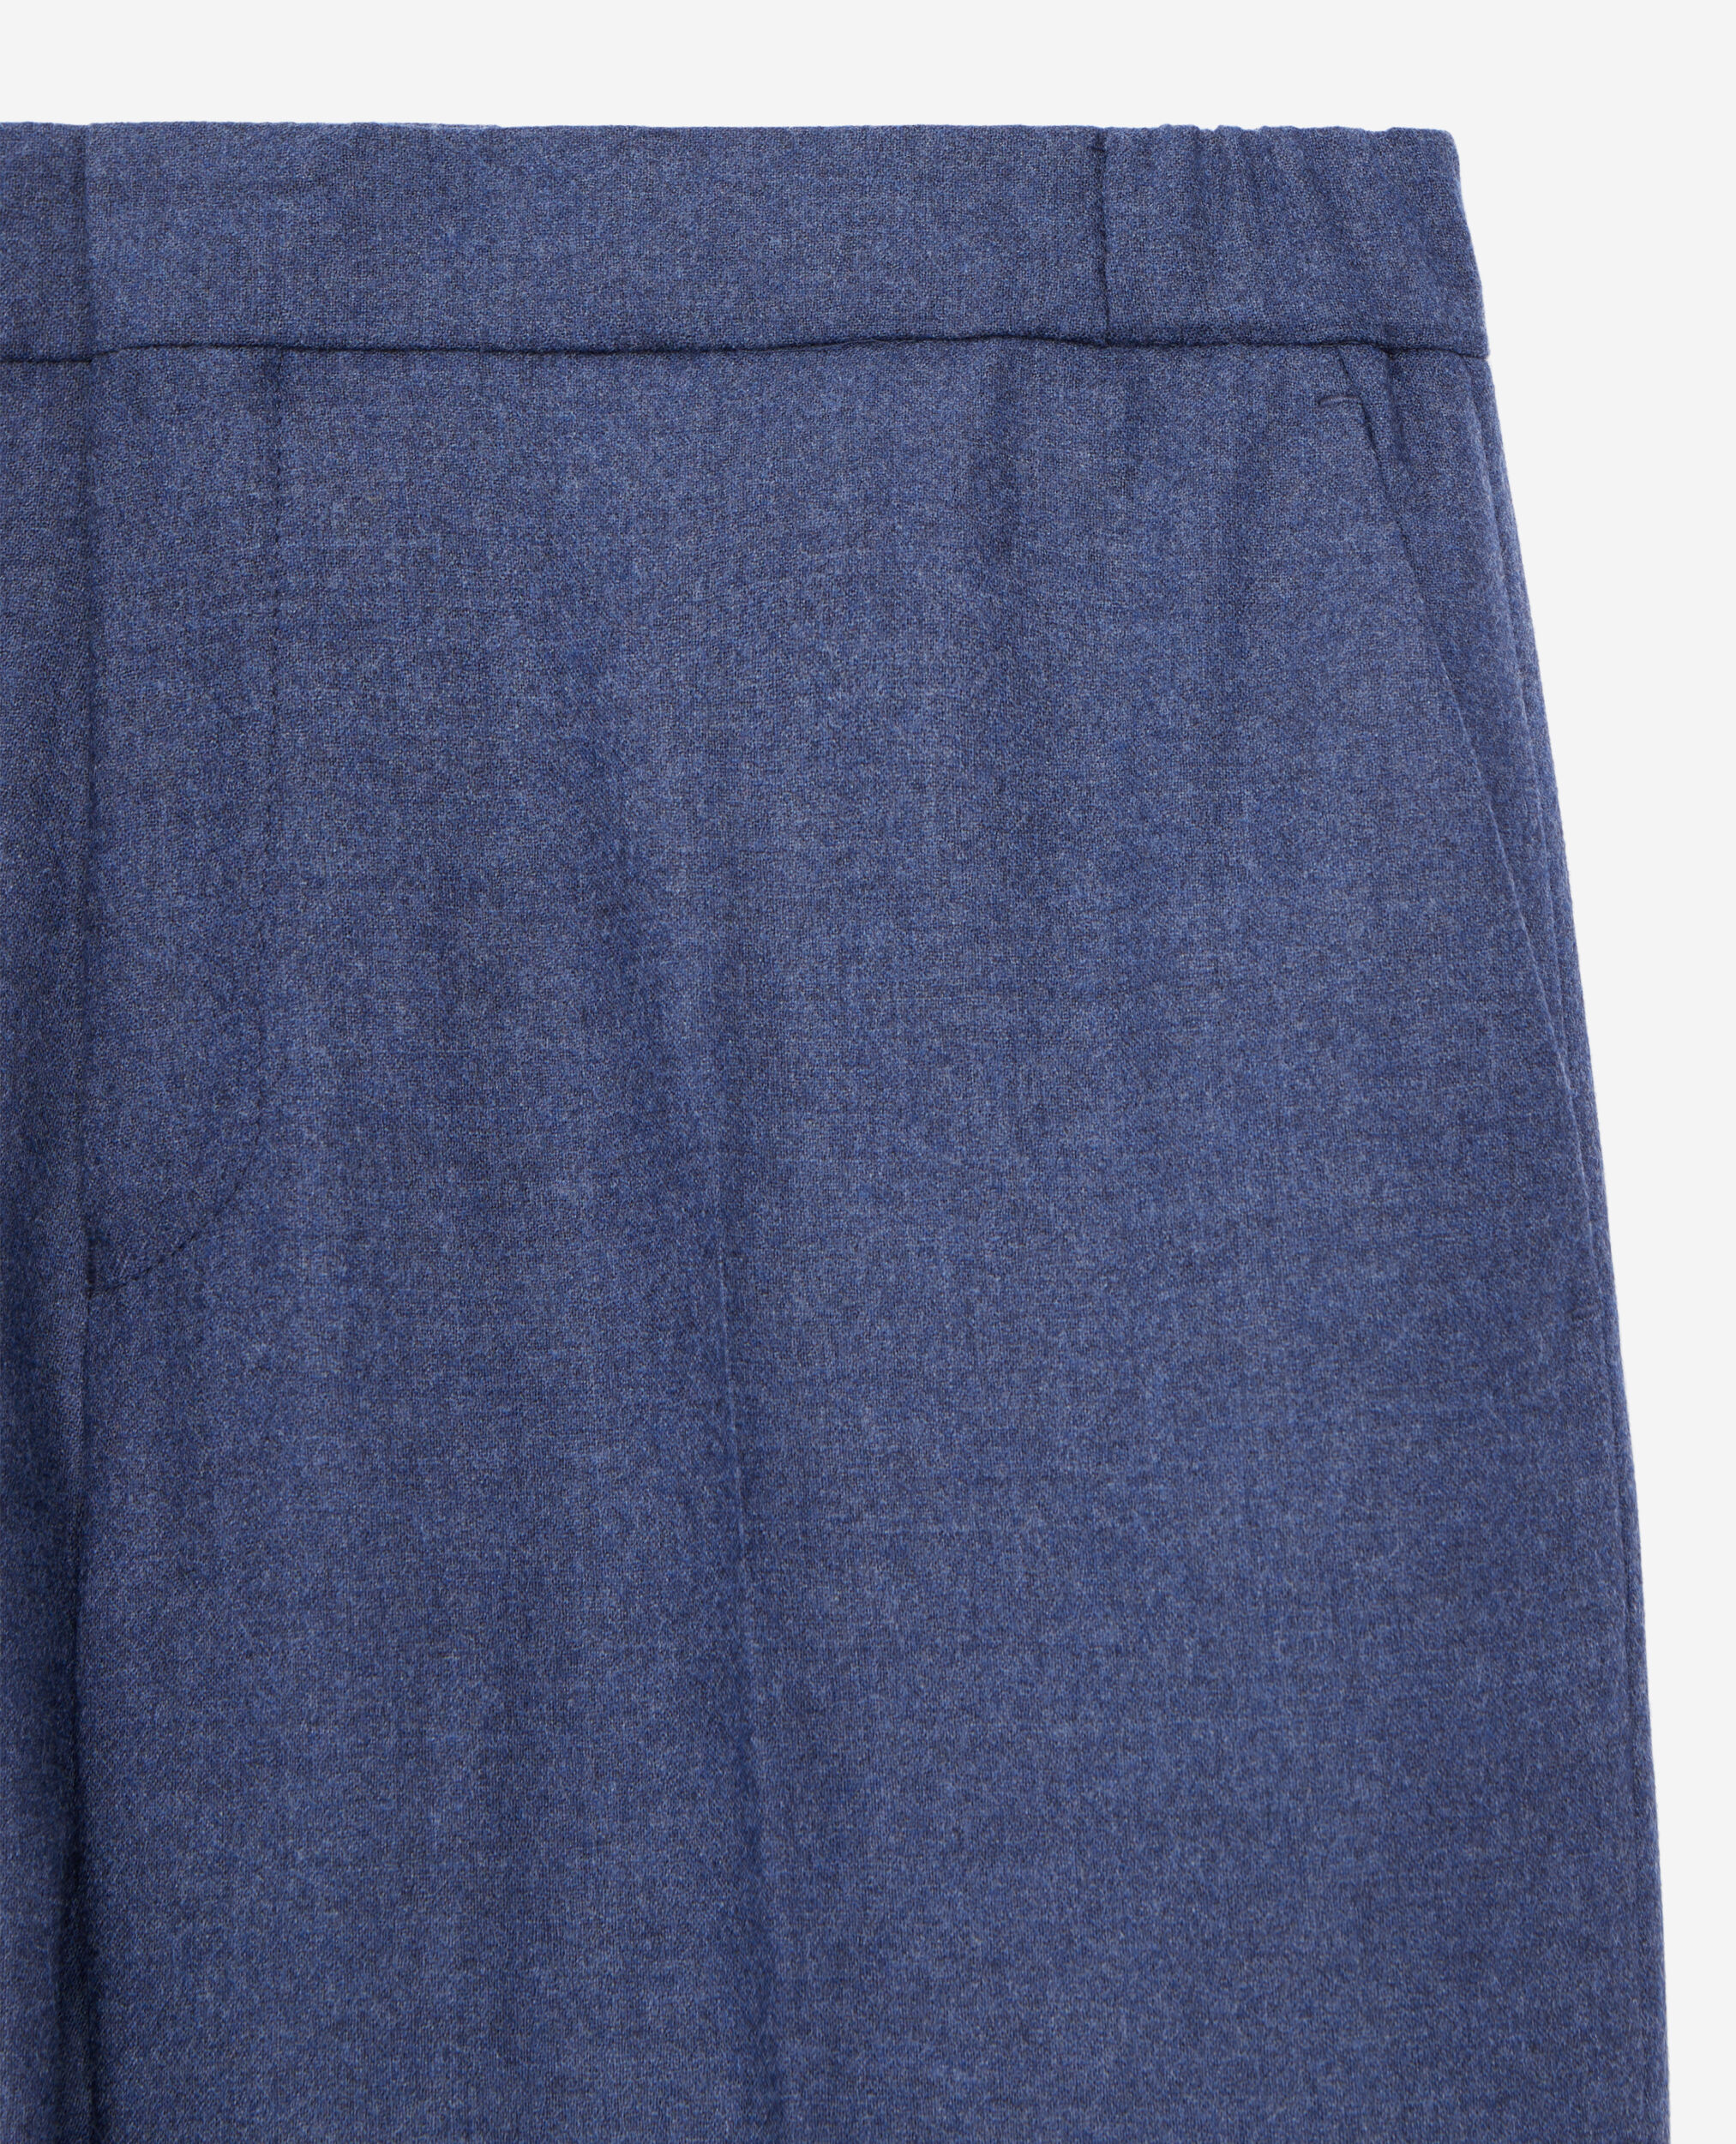 Blue flannel trousers, BLUE, hi-res image number null